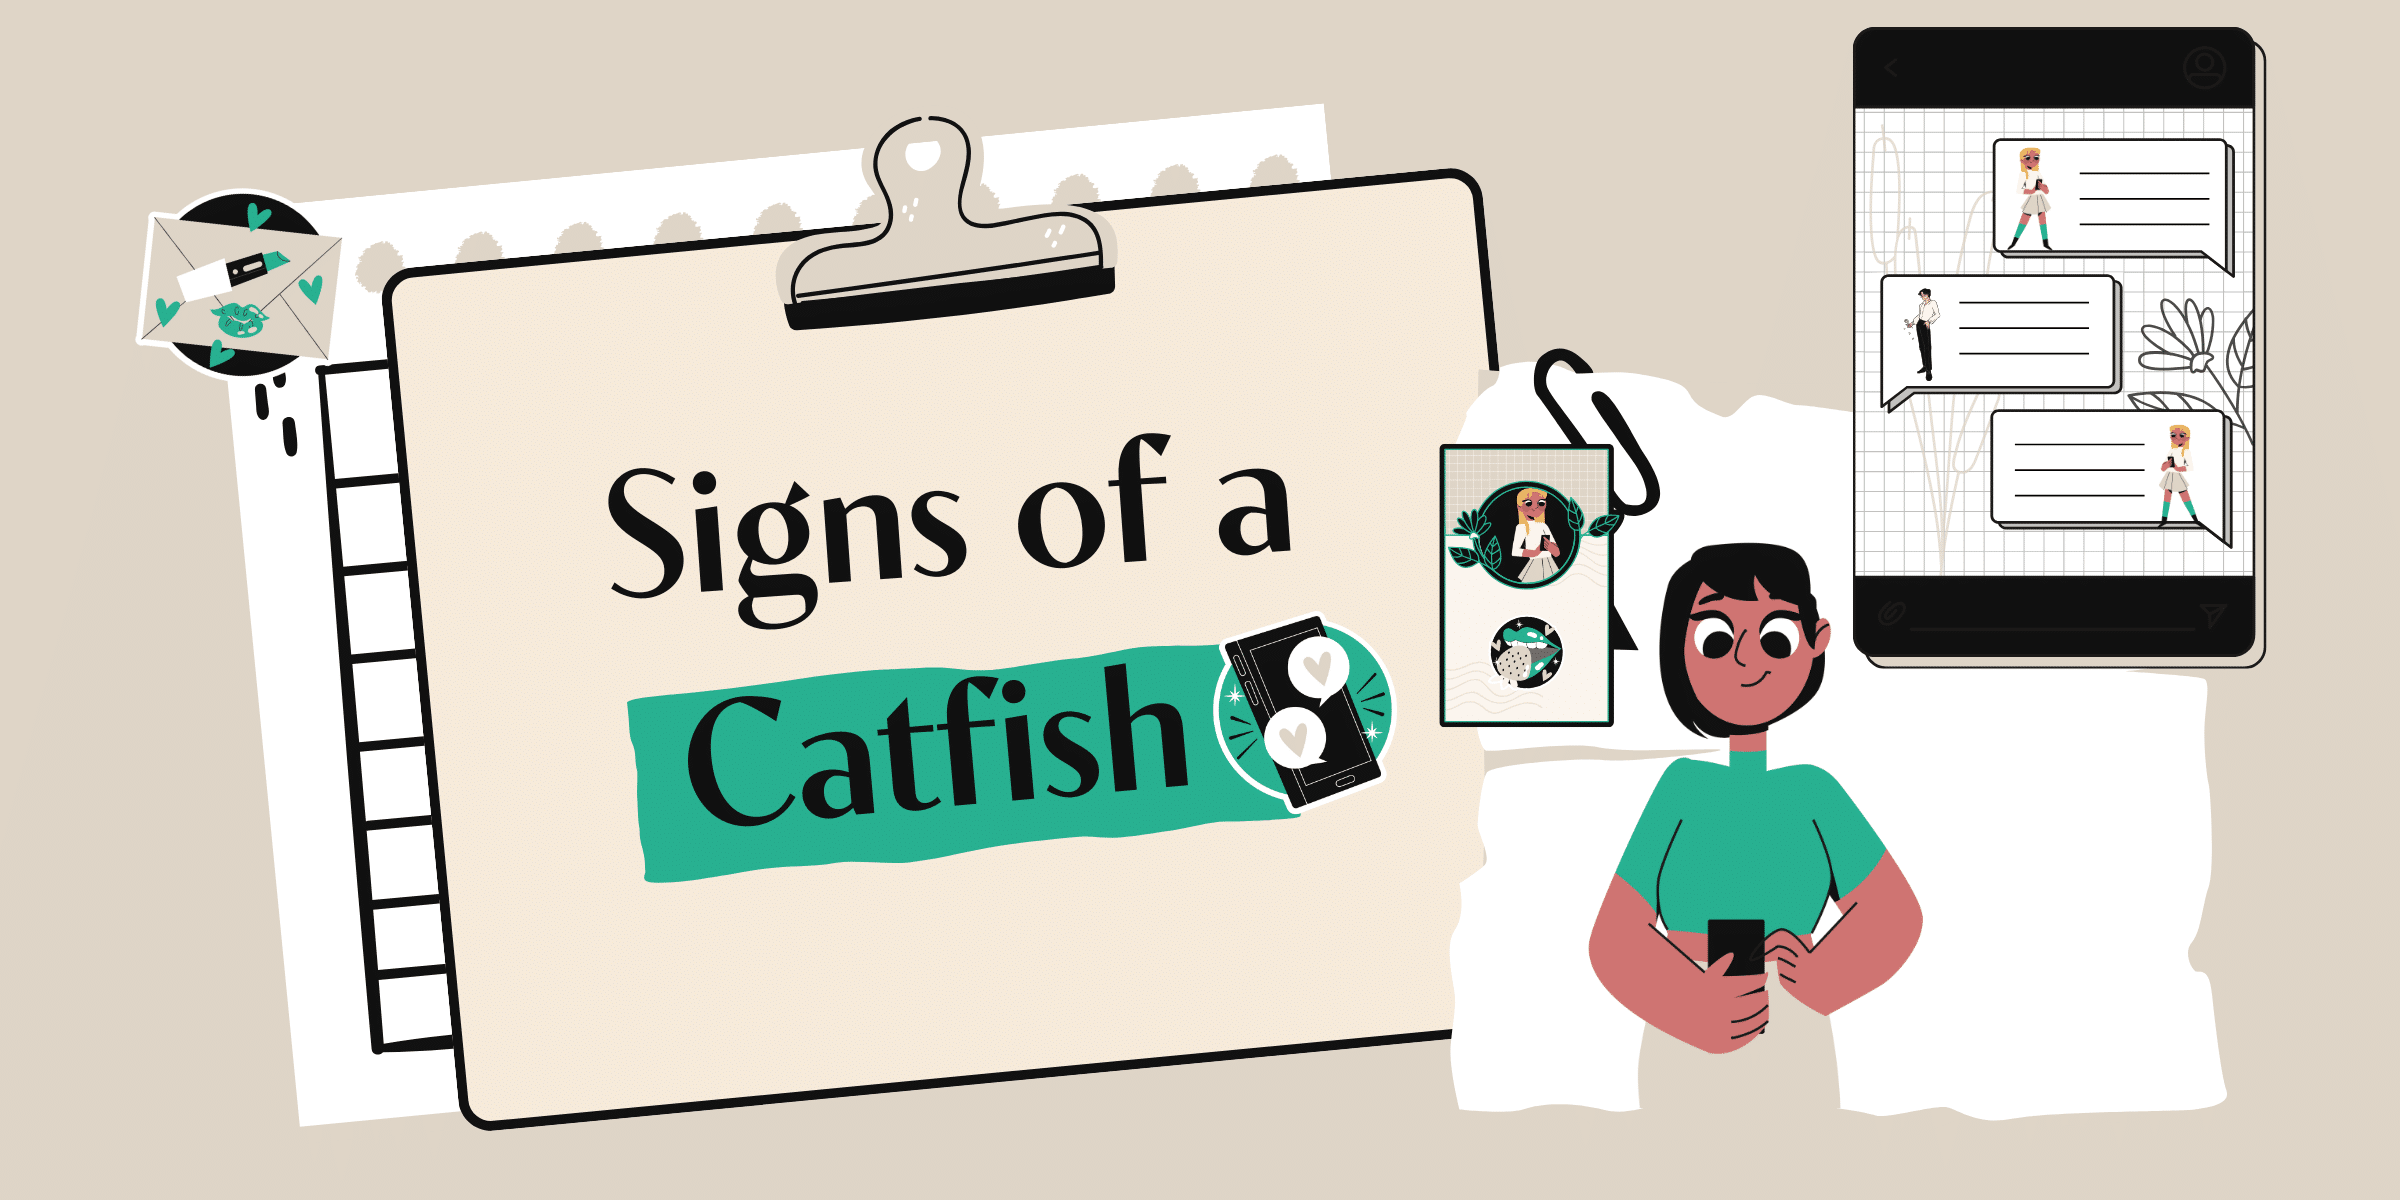 Catch a catfish online — here are the signs of catfishing and what to do if you think you’re being catfished.